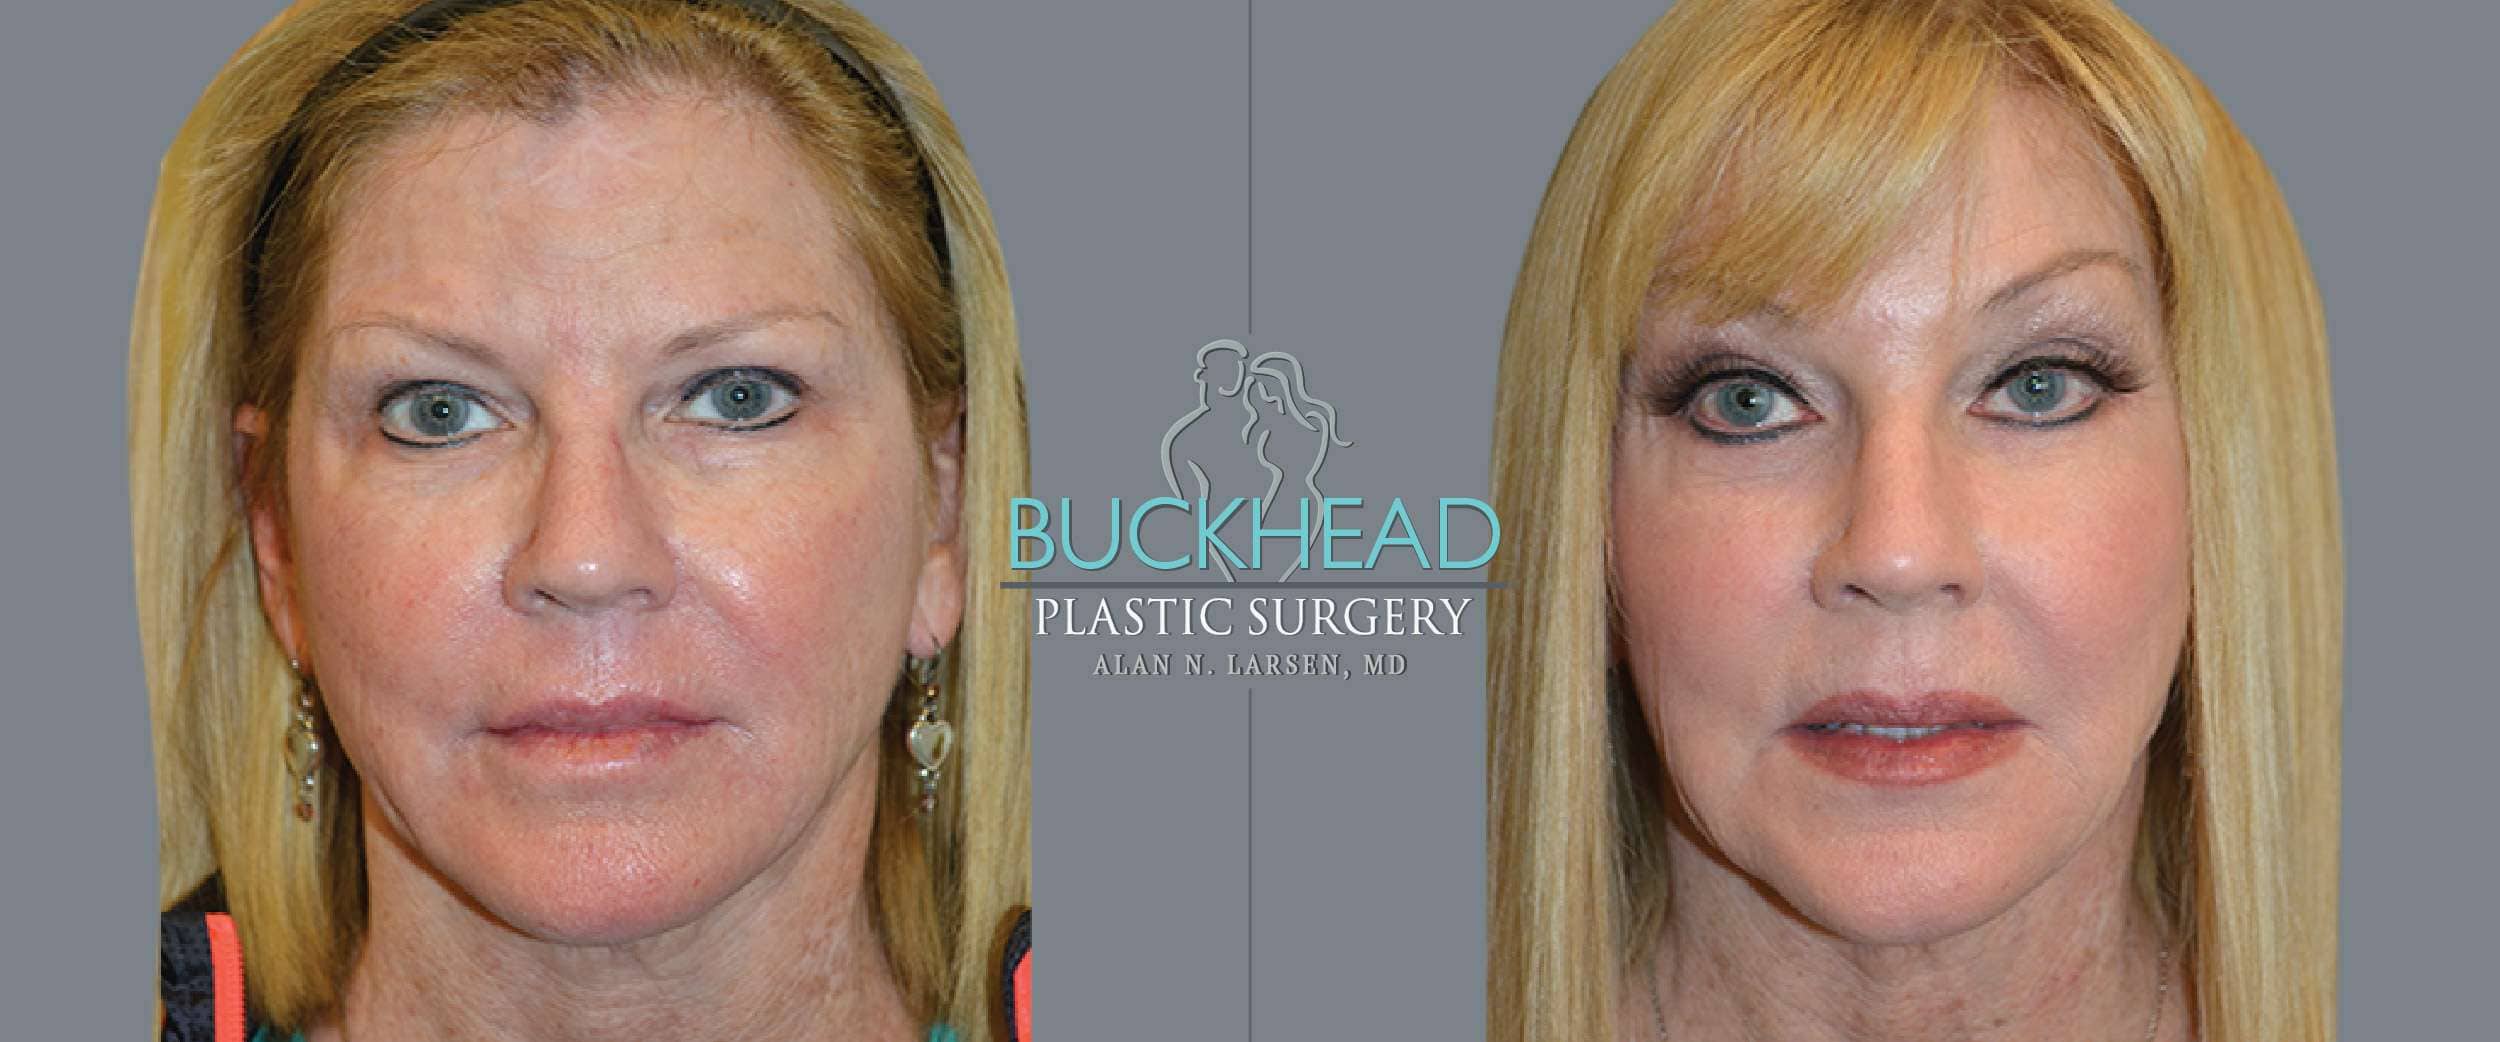 Before and After Photo Gallery | Blepharosty | Buckhead Plastic Surgery | Alan N. Larsen, MD | Double Board-Certified Plastic Surgeon | Atlanta GA